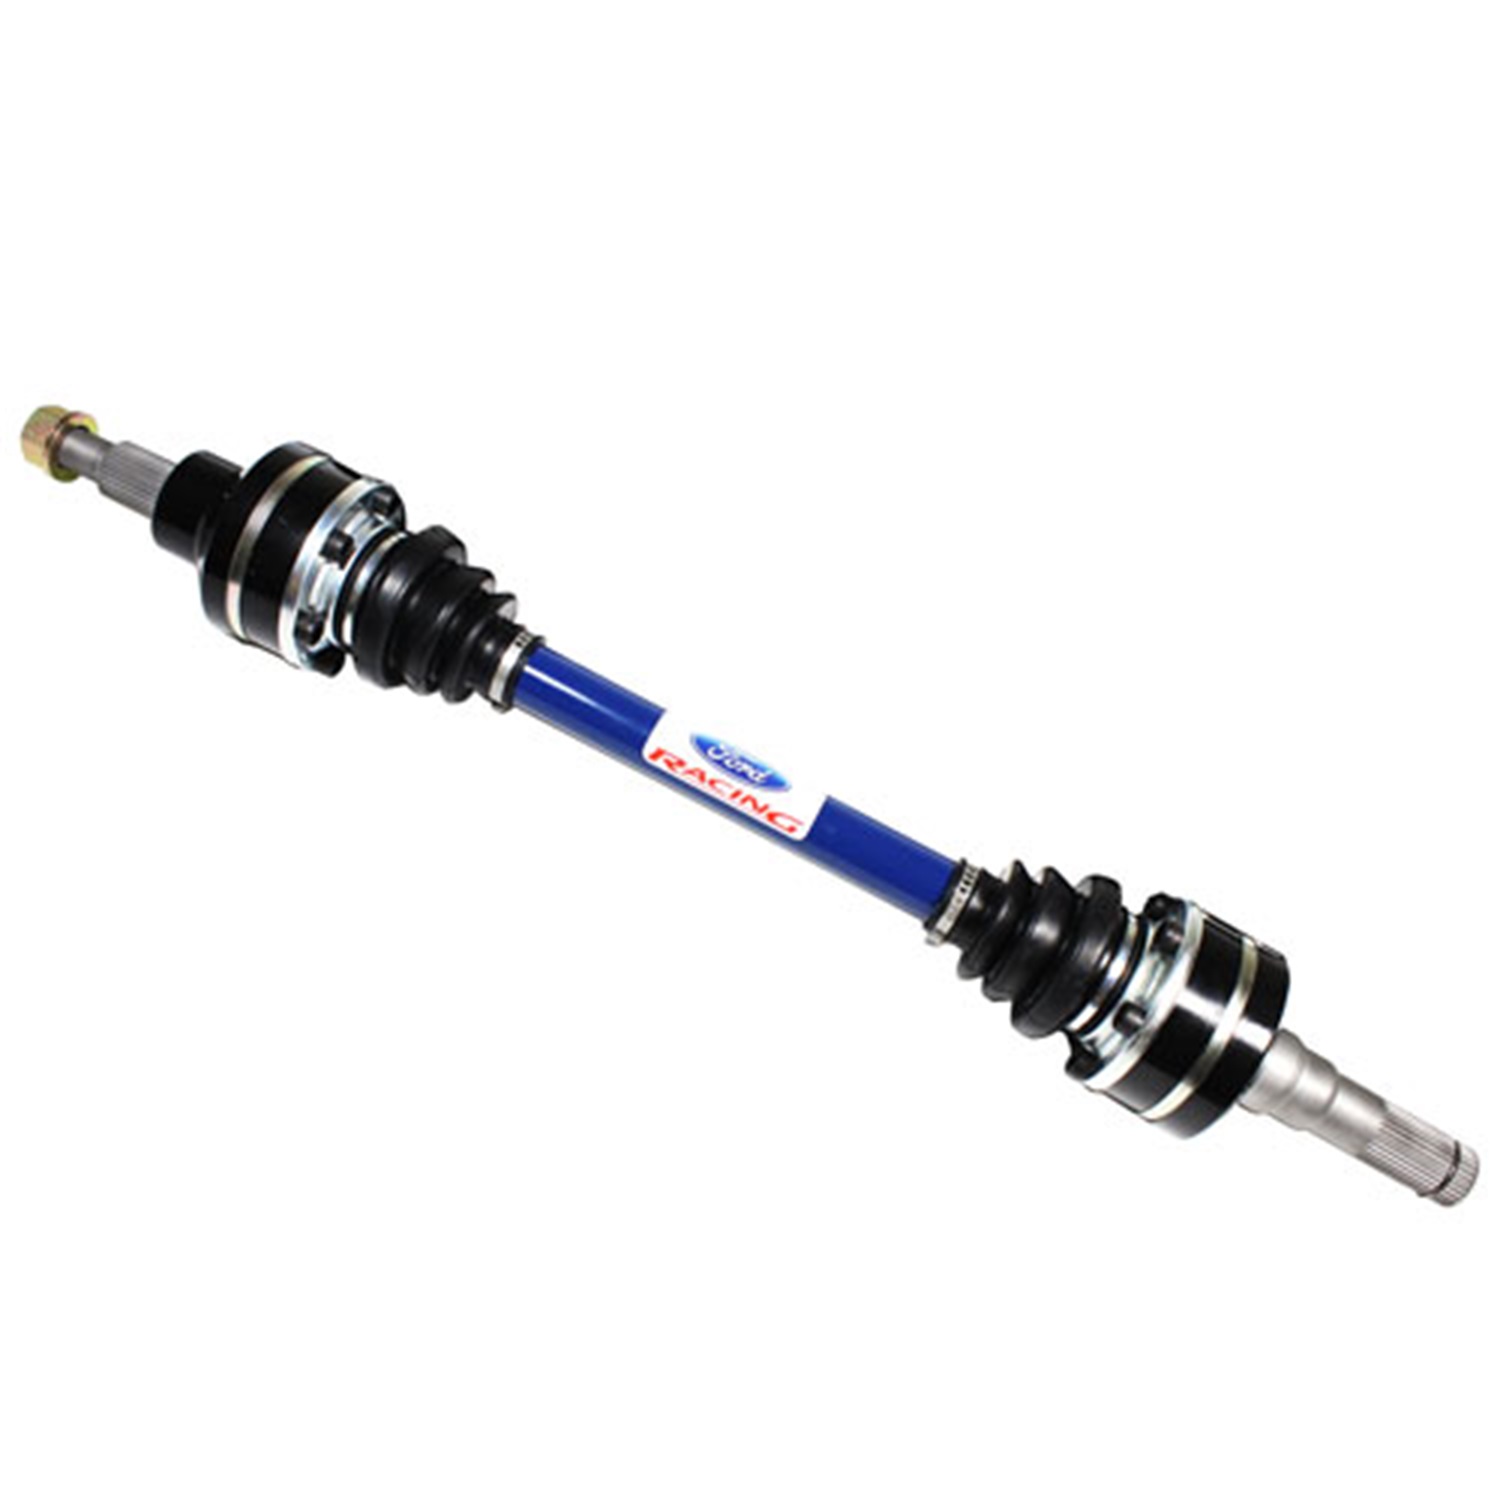 Ford Racing Ford Racing M-4139-M Mustang Axle Kit Fits 15 Mustang